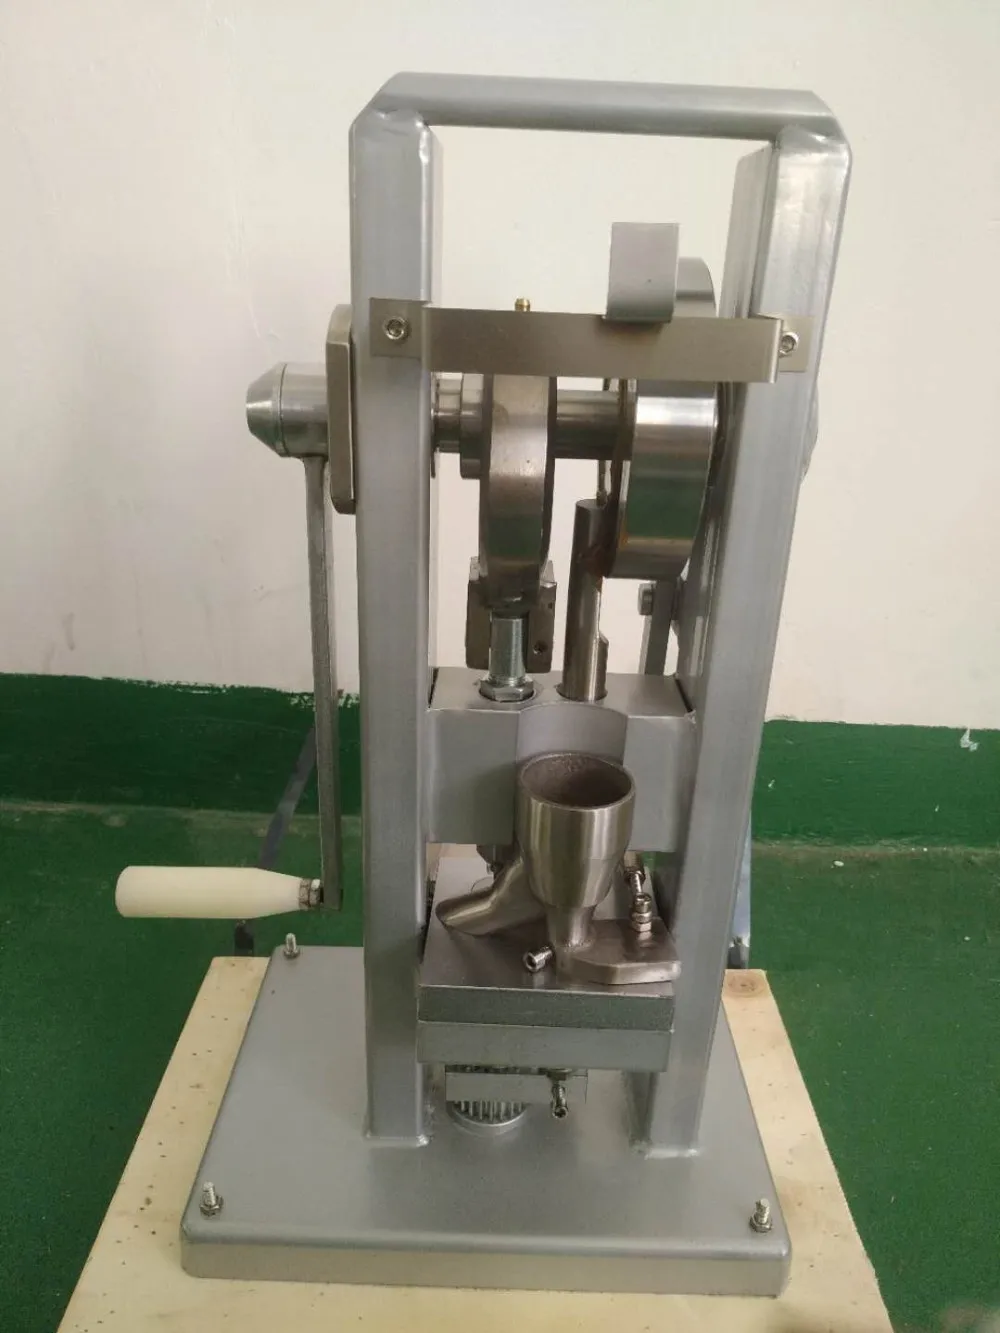 PHARMA high-quality tablet press machine manual factory for cosmetic factory